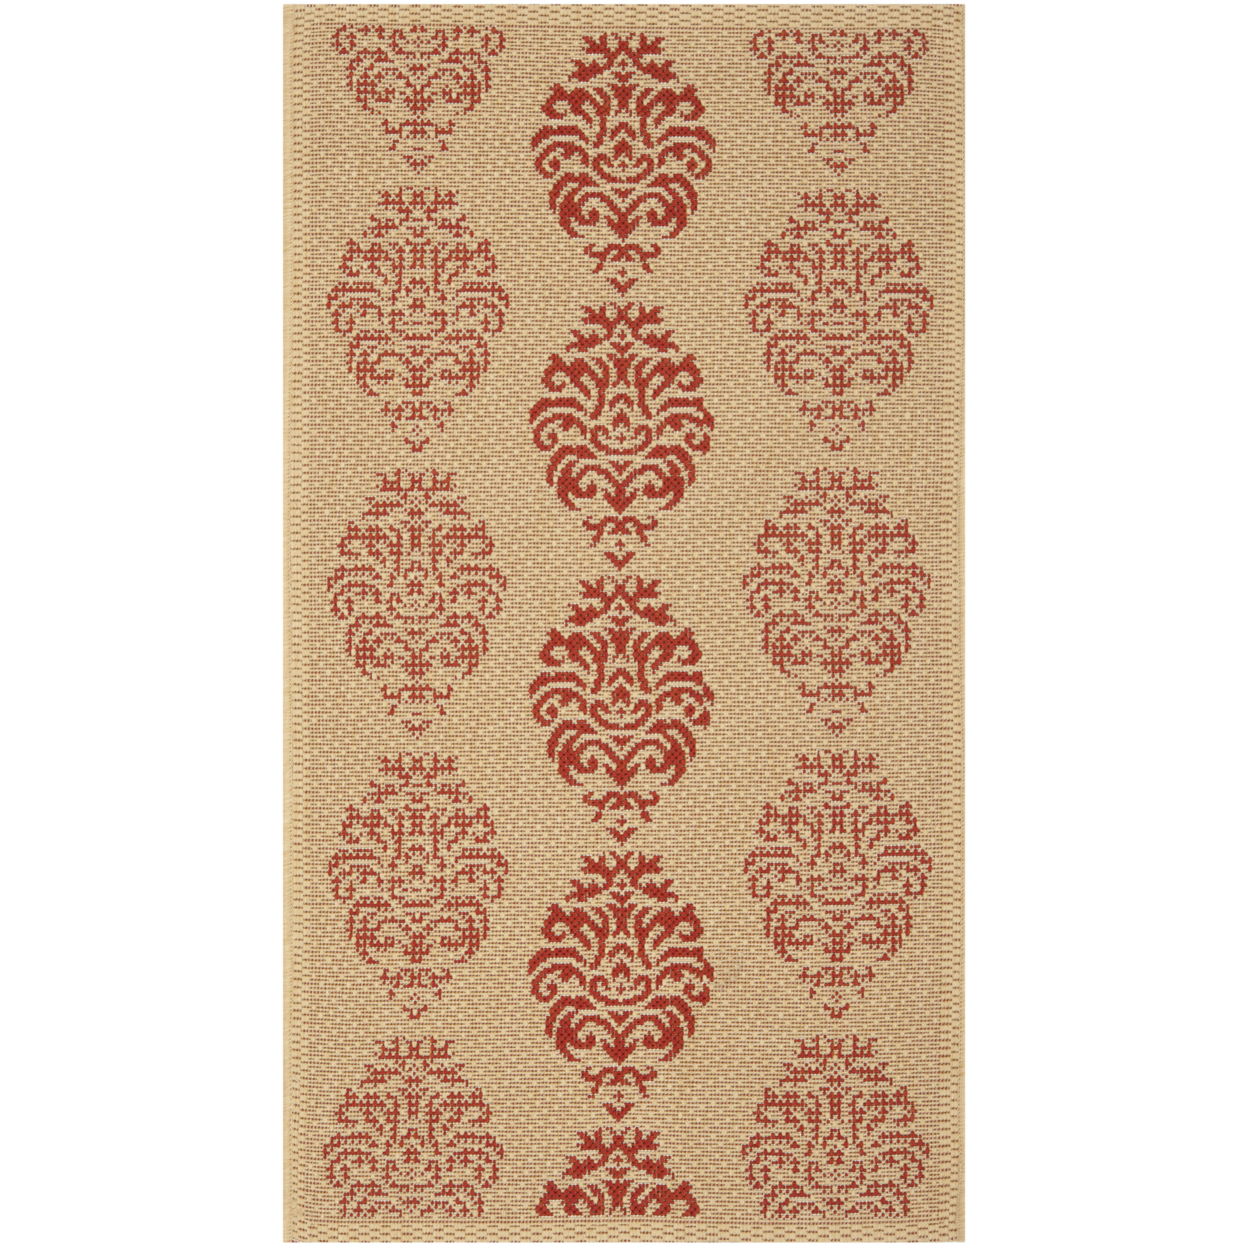 SAFAVIEH Outdoor CY2720-3701 Courtyard Natural / Red Rug - 4' X 5' 7